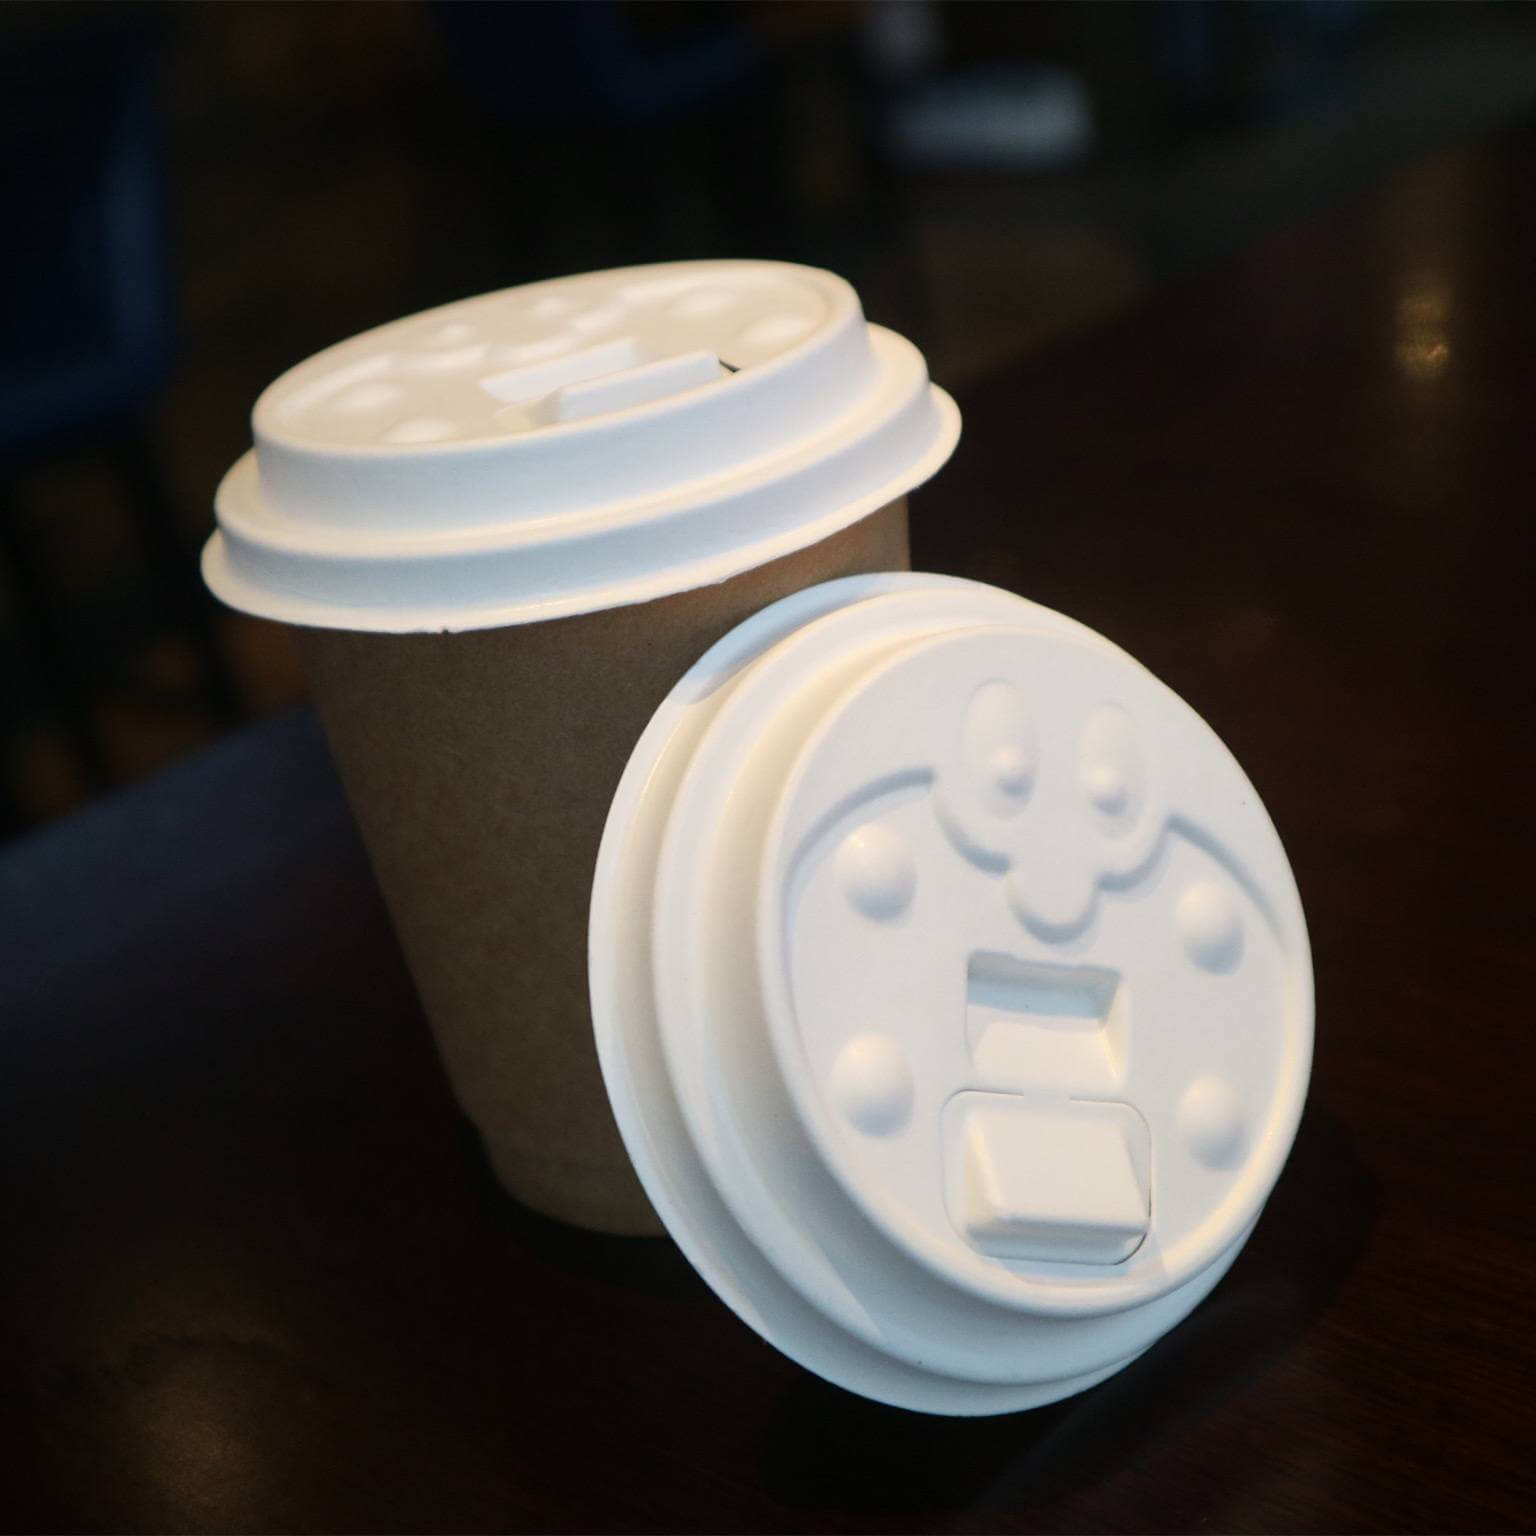 What are the advantages of a custom compostable lid